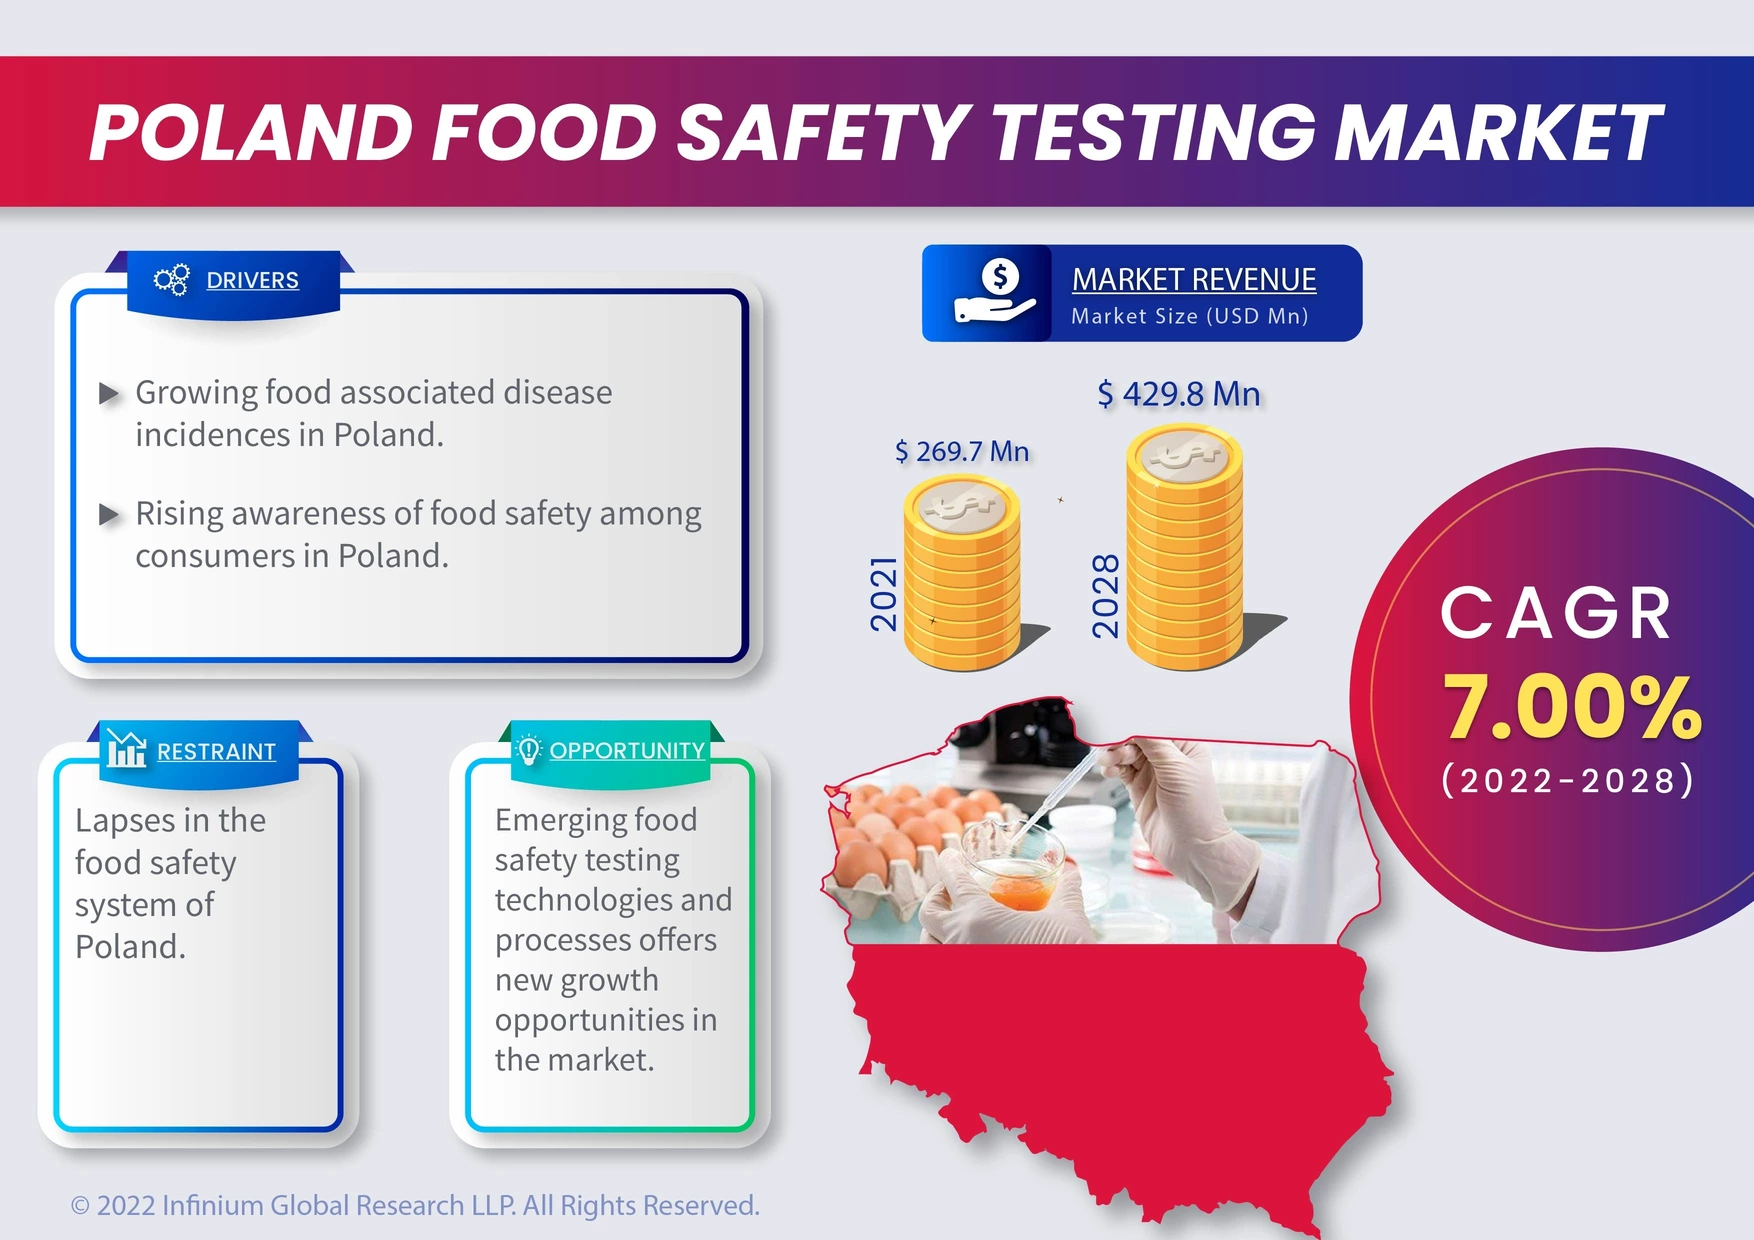 Poland Food Safety Testing Market Was Valued at USD 269.7 million in 2021 and is Expected to Reach USD 429.8 Million by 2028 and Grow at a CAGR Of 7.00% Over the Forecast Period.